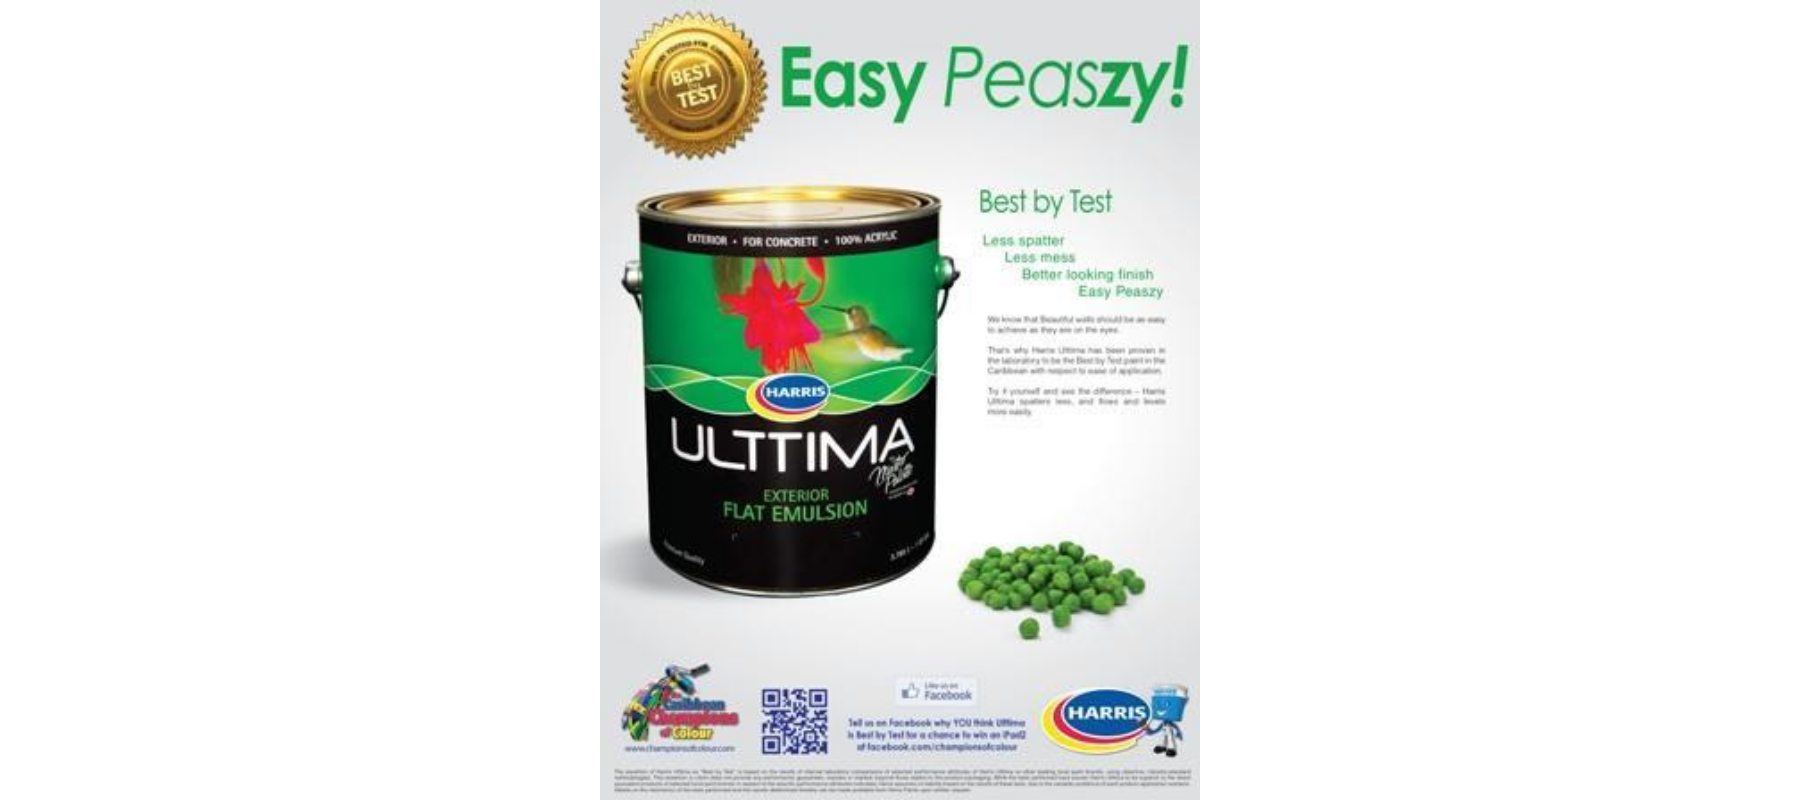 Ulttima by Harris Paints proven to be "Best by Test"